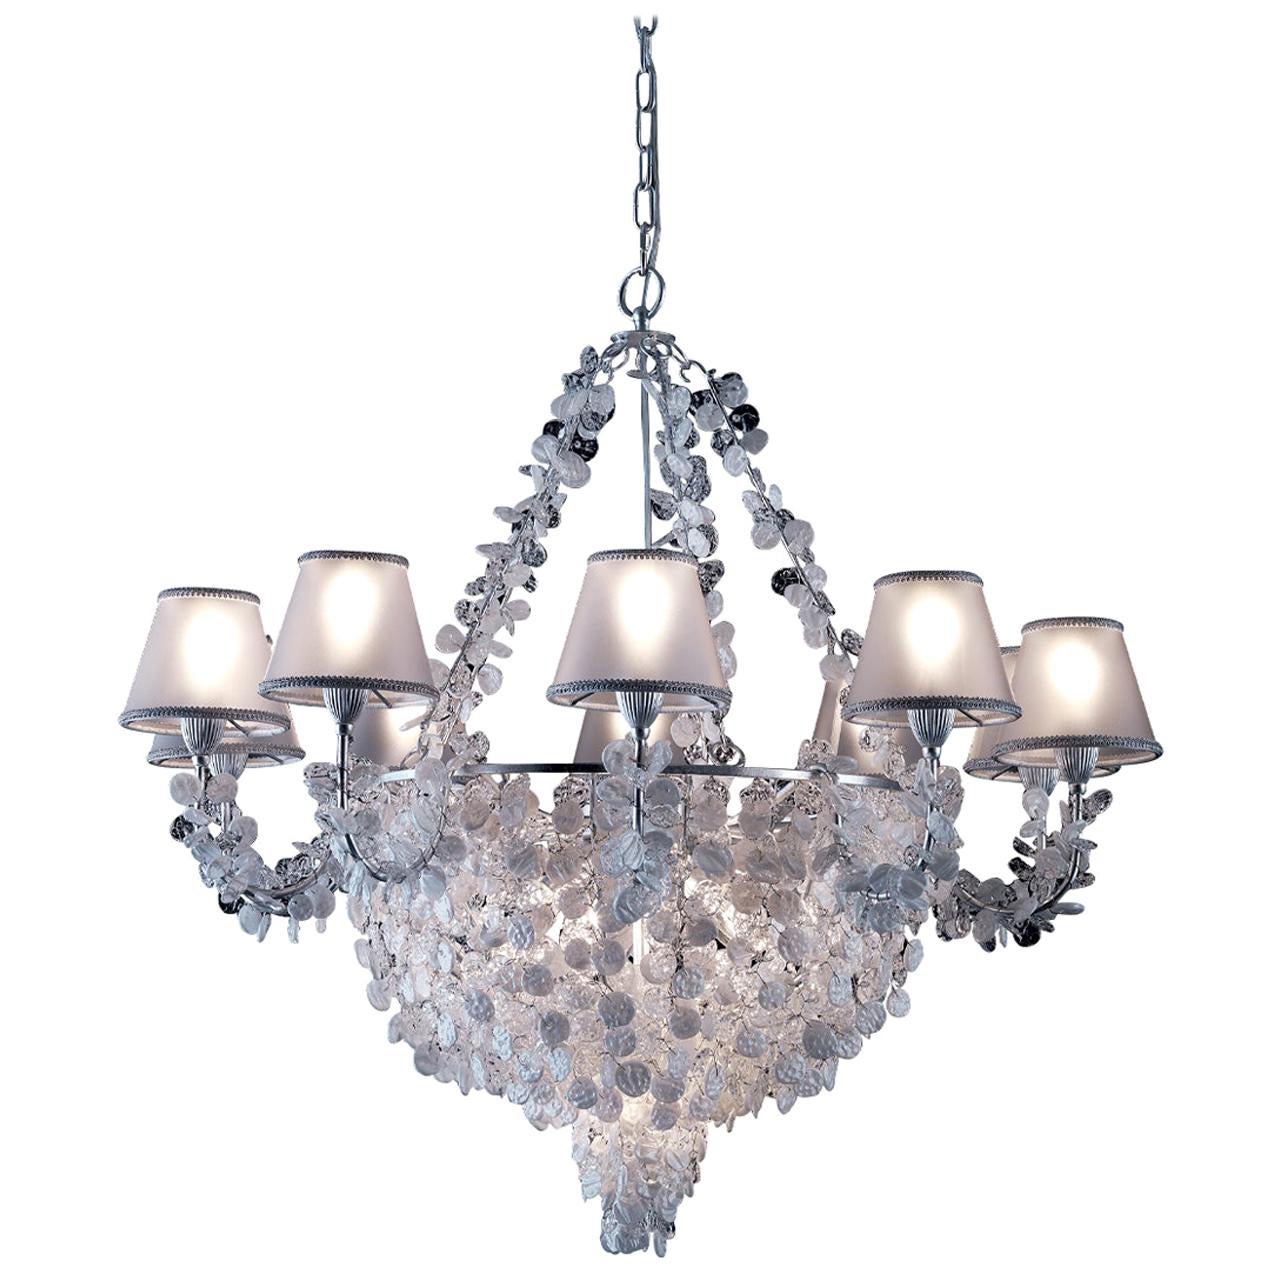 16112 Chandelier For Sale